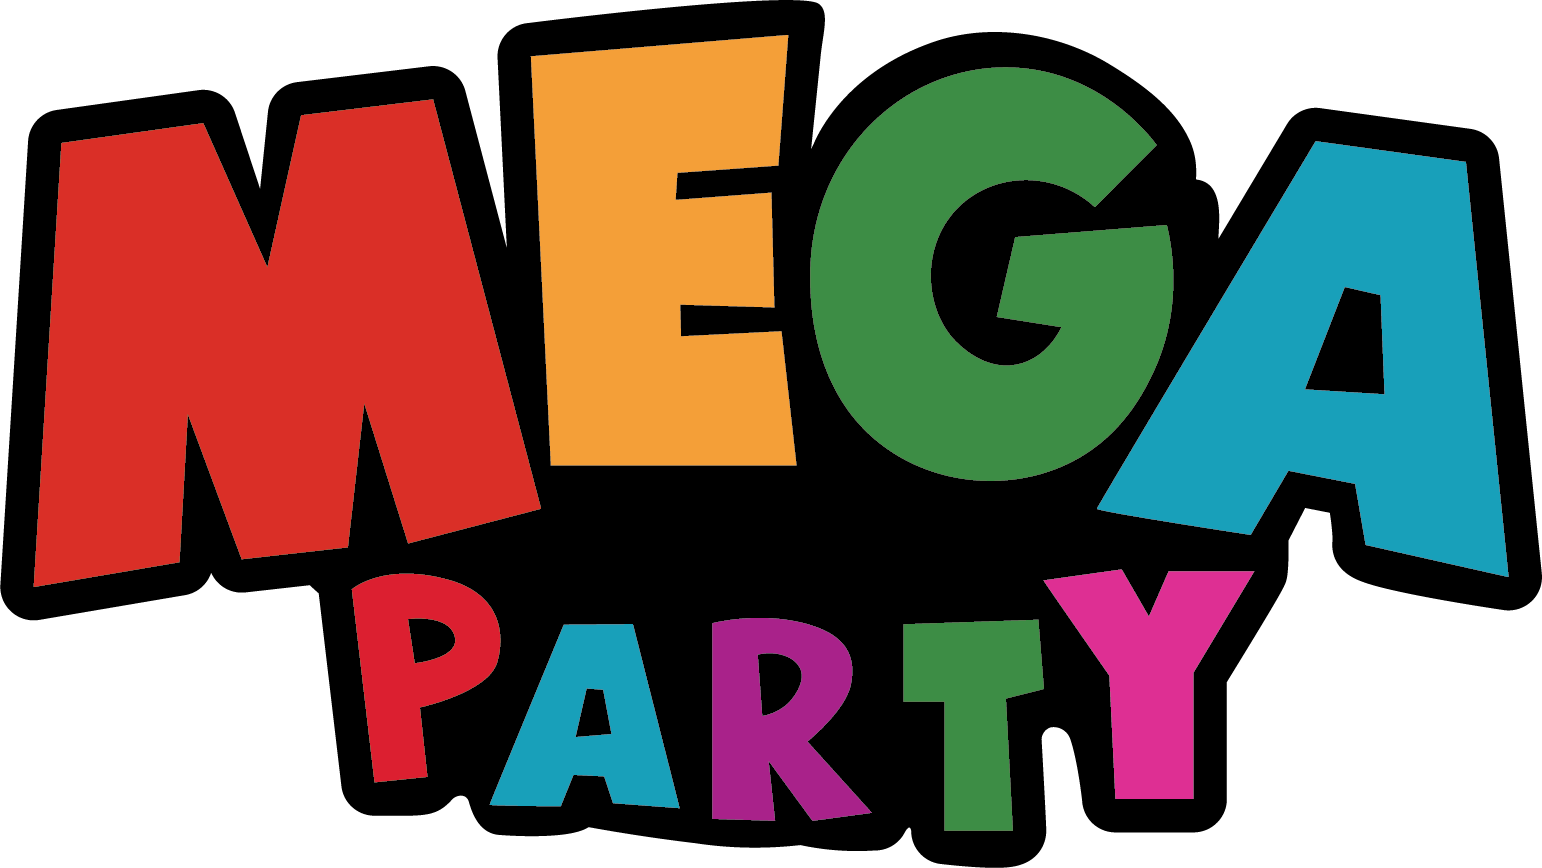 Mega Party - Discount Variety Store